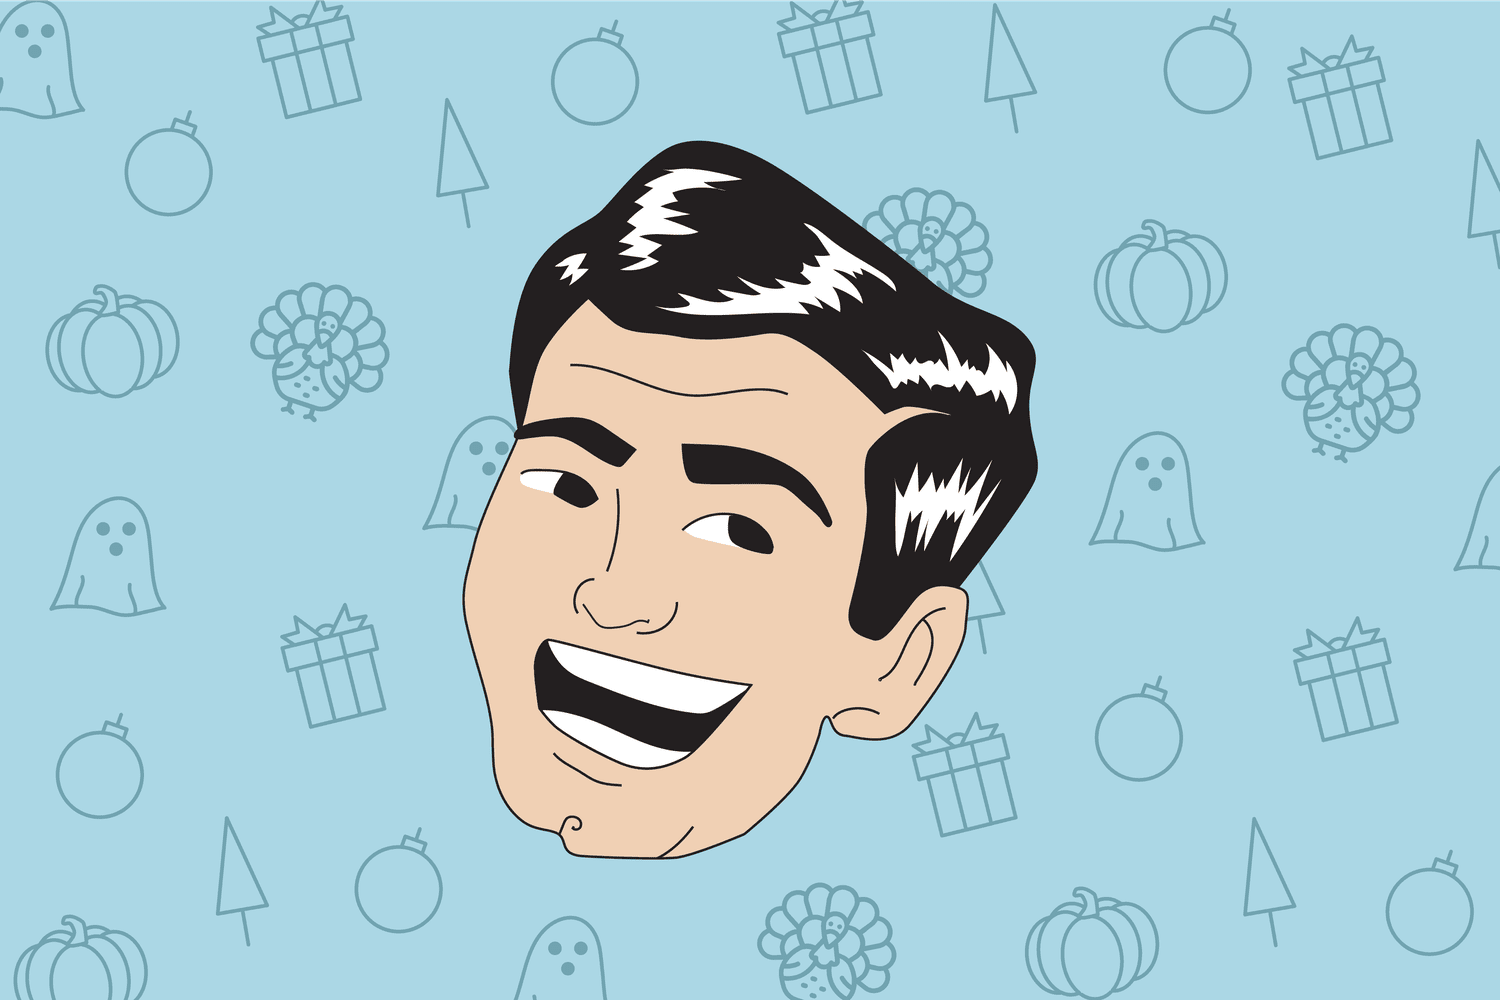 caricature of laughing dad on top of holiday icons